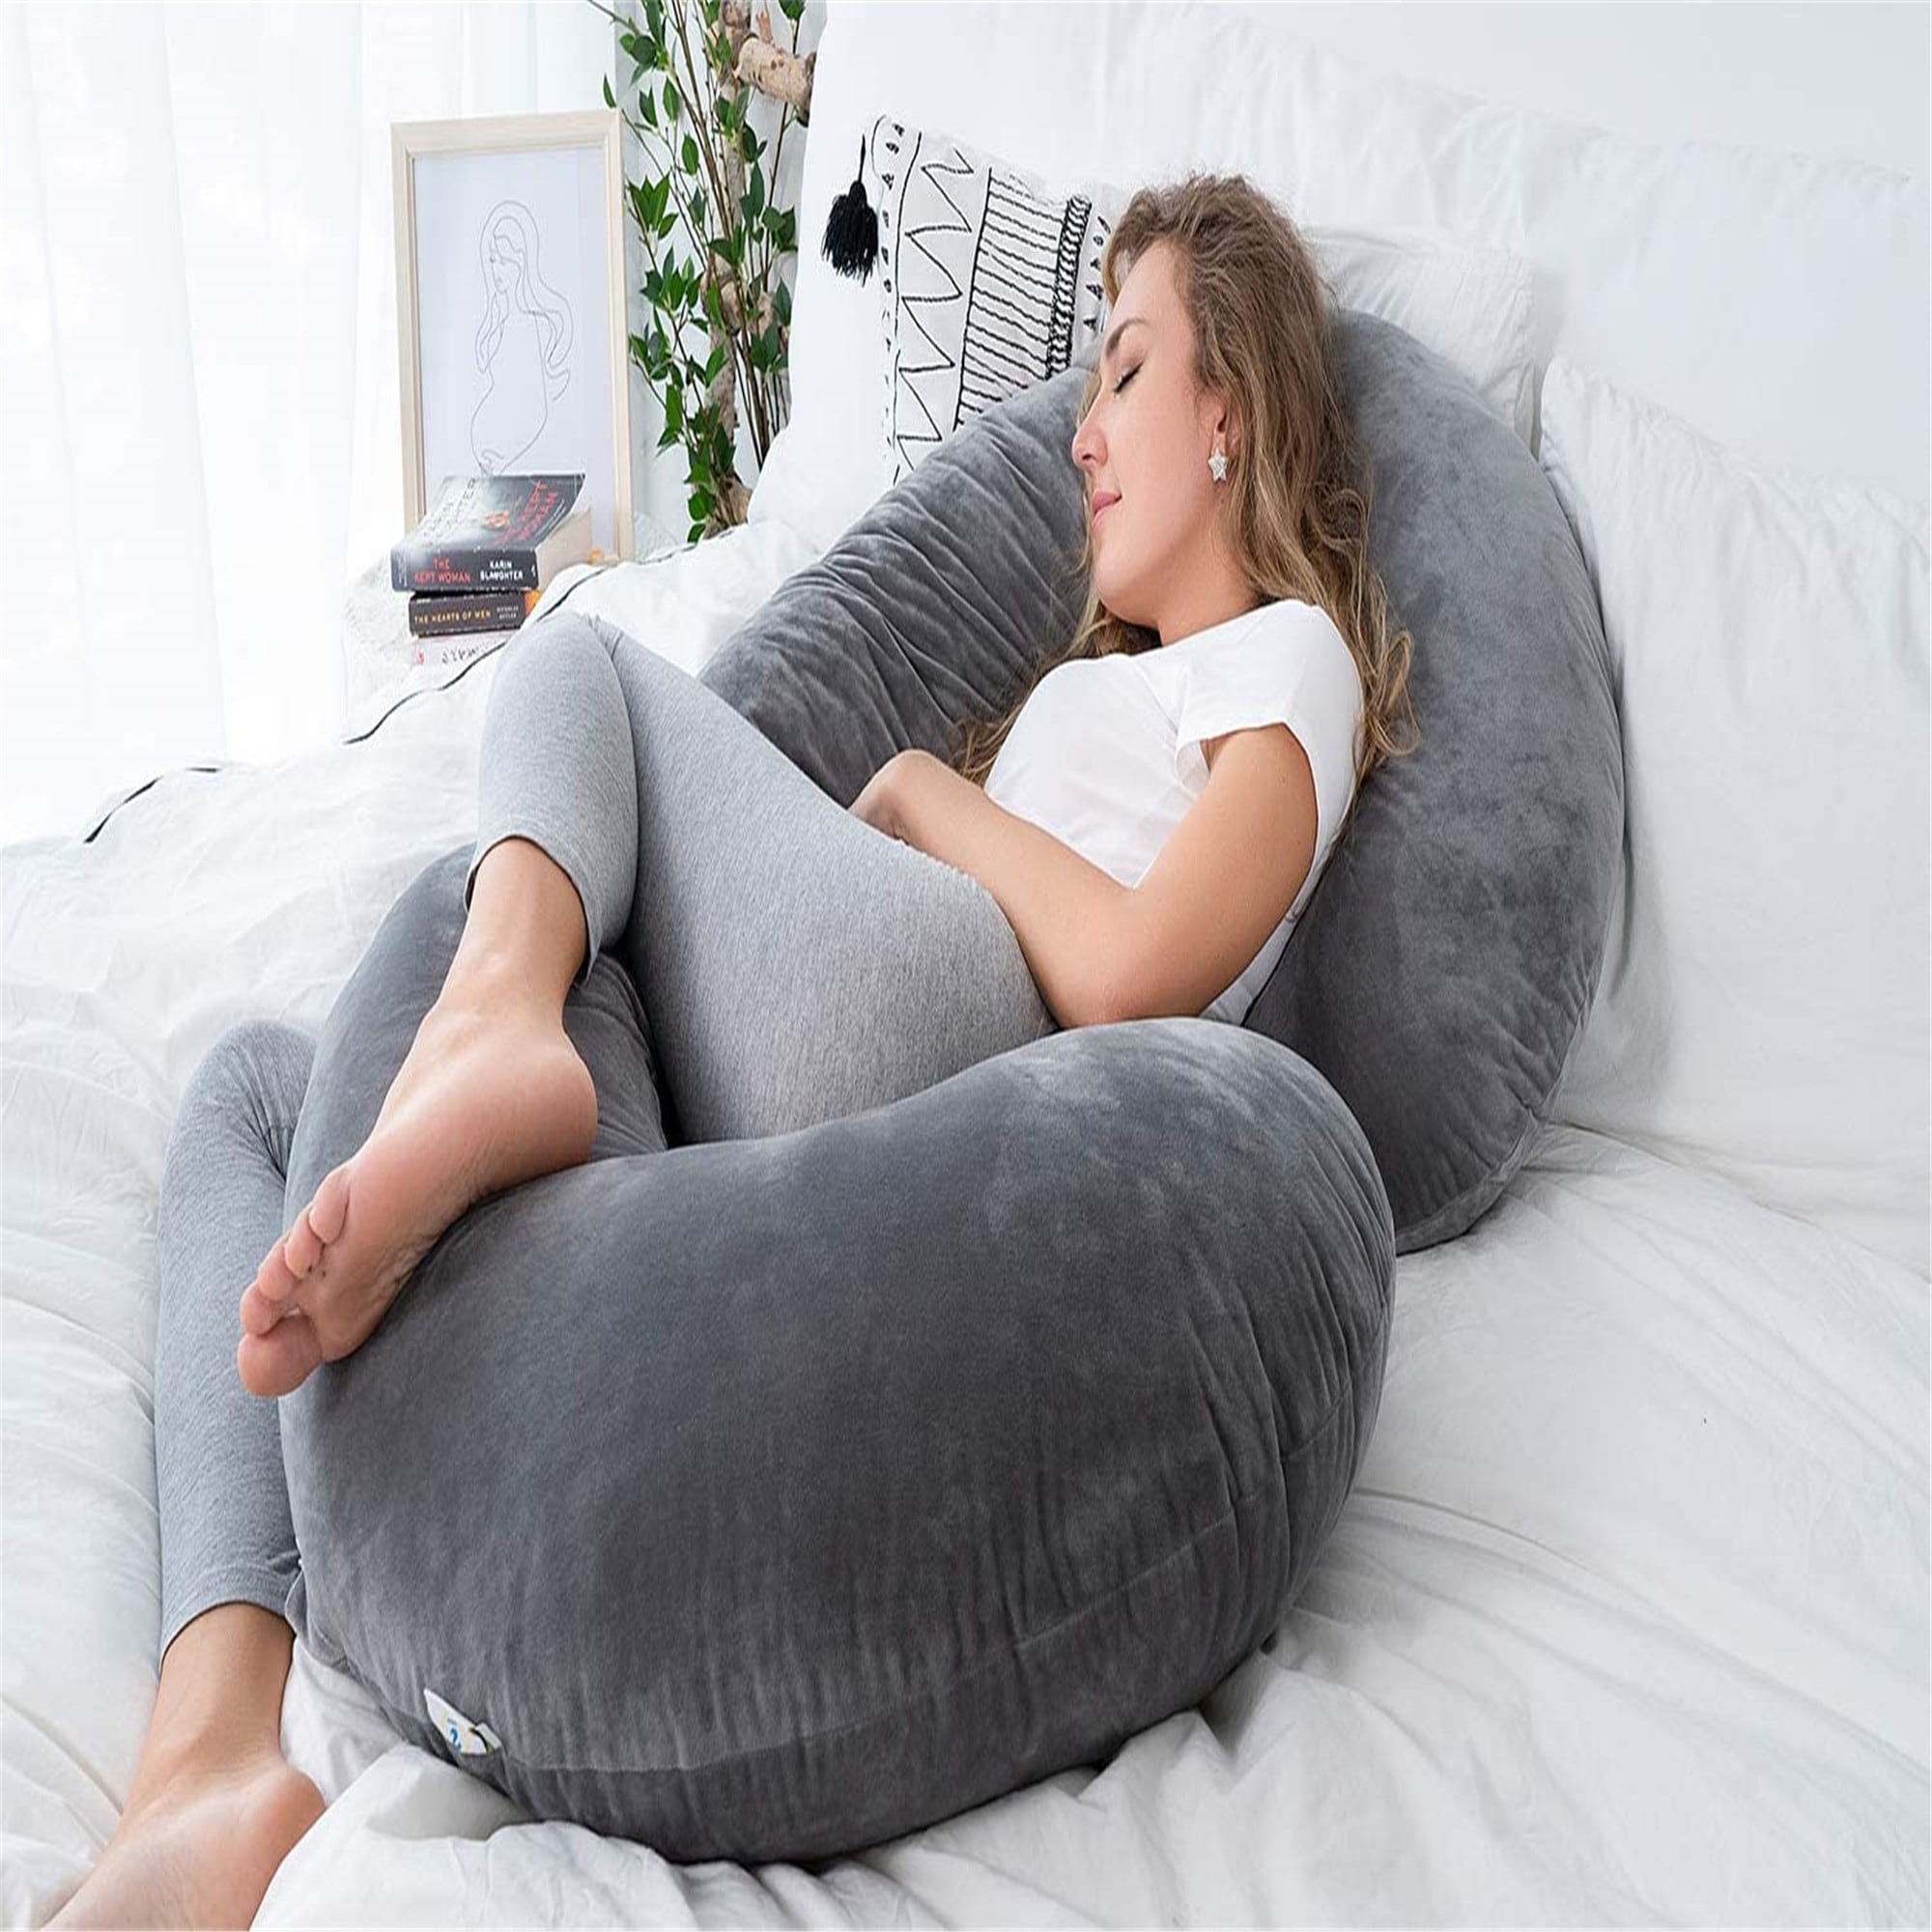 https://ak1.ostkcdn.com/images/products/is/images/direct/fac4e27716b5eeba2f1ea7250cc8a4769fc64469/Pregnancy-Pillow%2CMaternity-Body-Pillow-for-Pregnant-Women%2CC-Shaped-Full-Body-Pillow-with-Zippers-Jersey-Cover.jpg